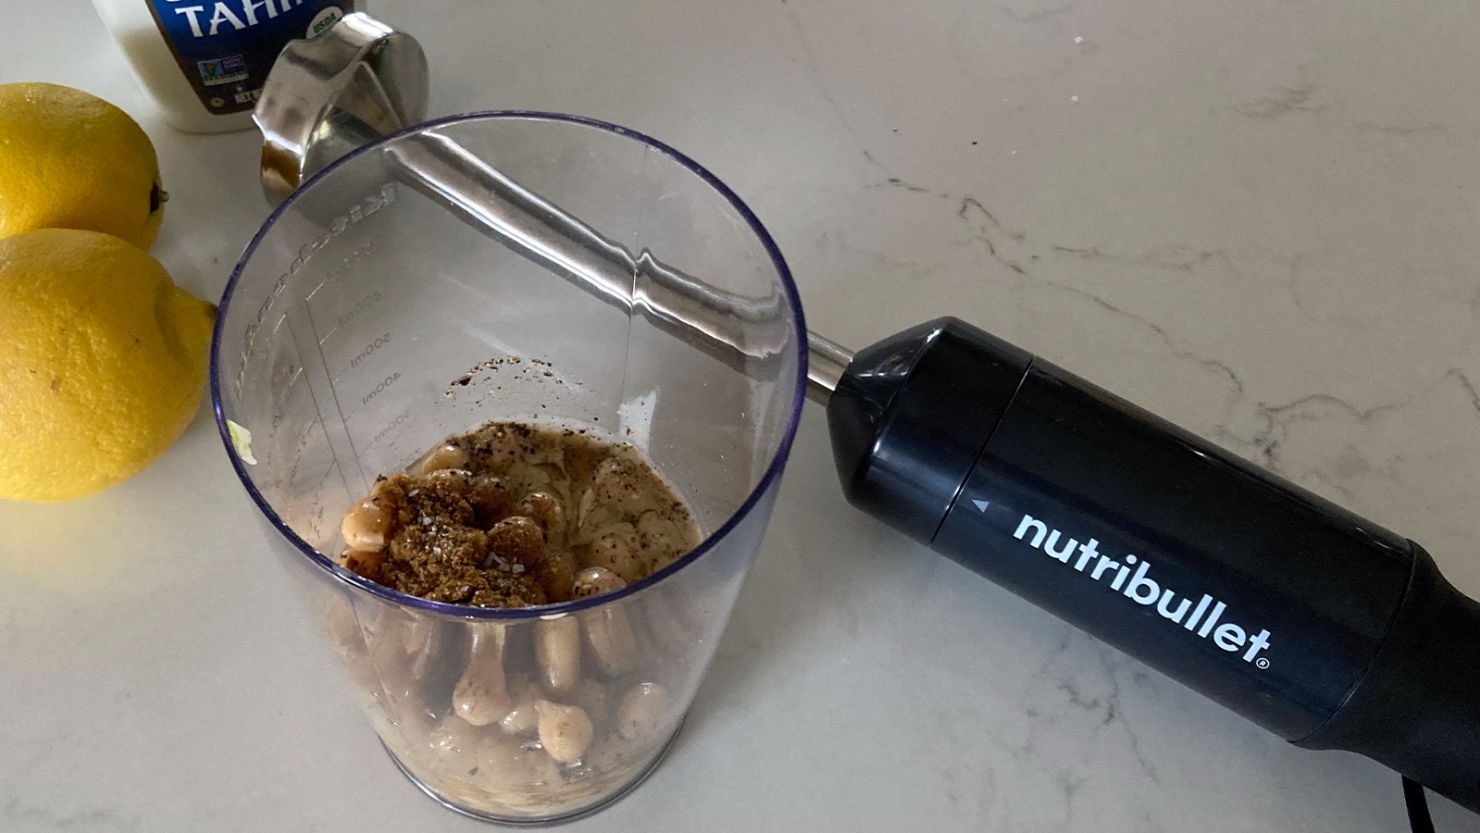 The Best Immersion (Stick) Blenders for ALL Budgets